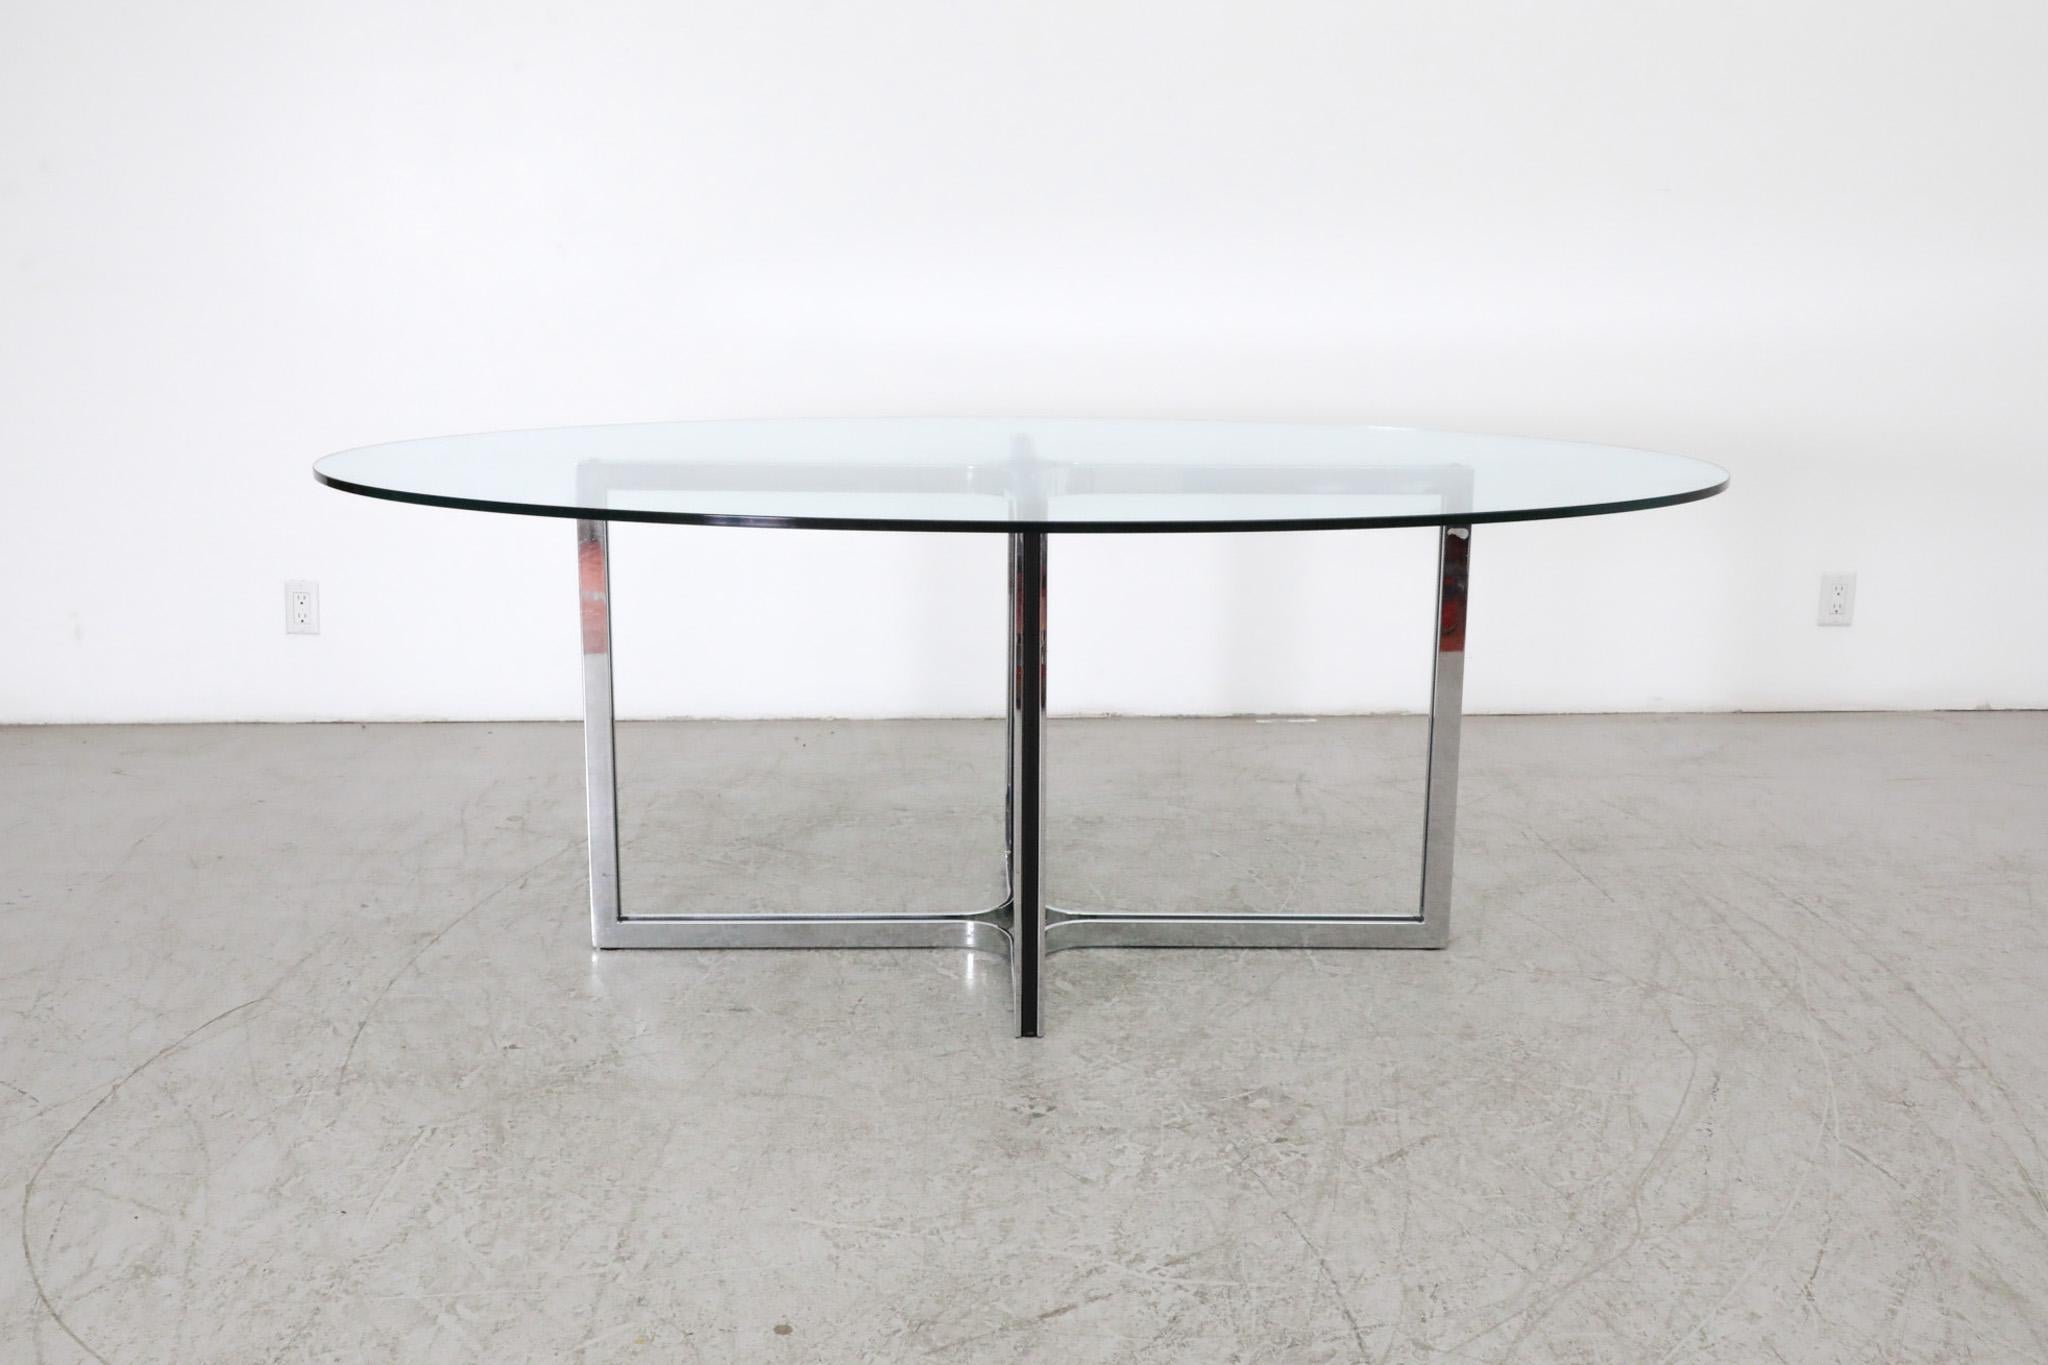 Vintage Italian dining table by Gastone Rinaldi for Thema Italy 1. Gastone Rinaldi (1920-2006) was a Padua-born Italian designer. In Padua, he began working for Rima, a metal furniture manufacturer founded in 1916 by his father, Mario Rinaldi. He